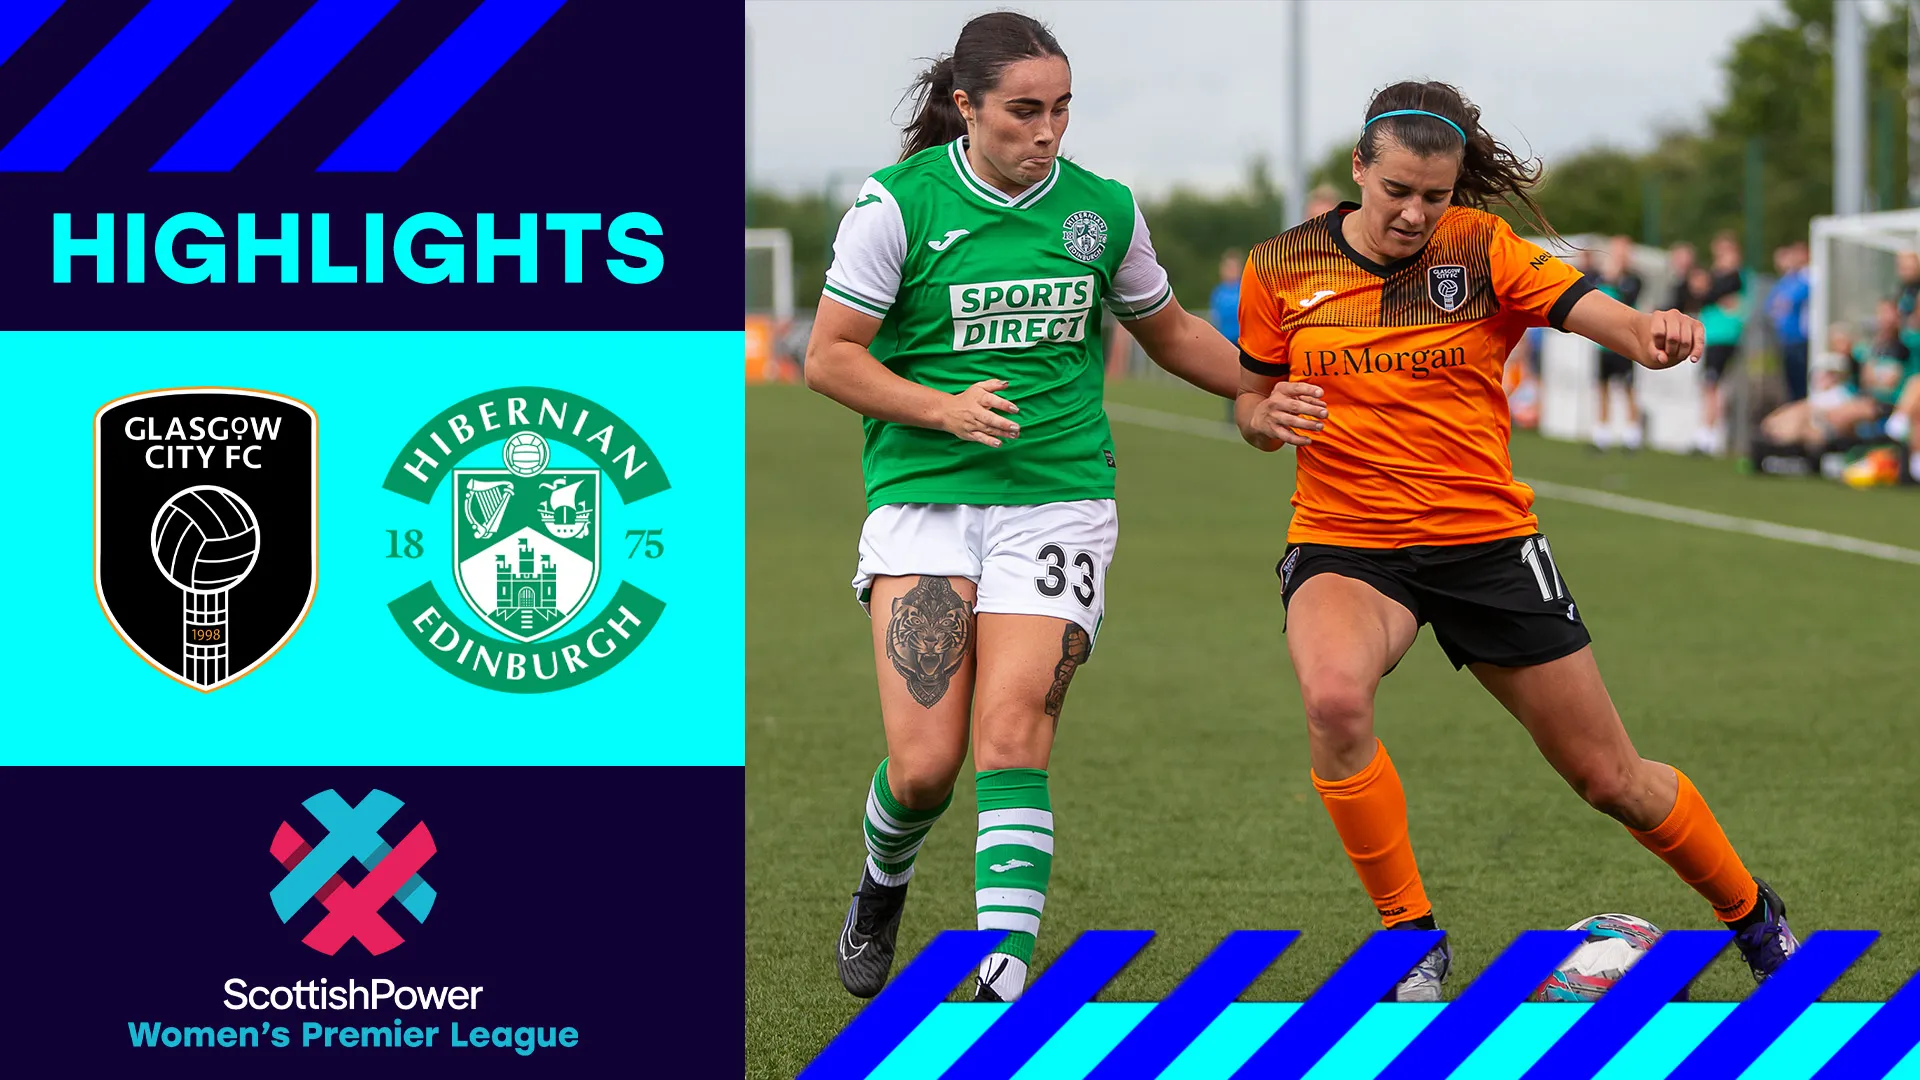 Image for Glasgow City 3-0 Hibernian | City begin title defence with comfortable win over Hibs | SWPL